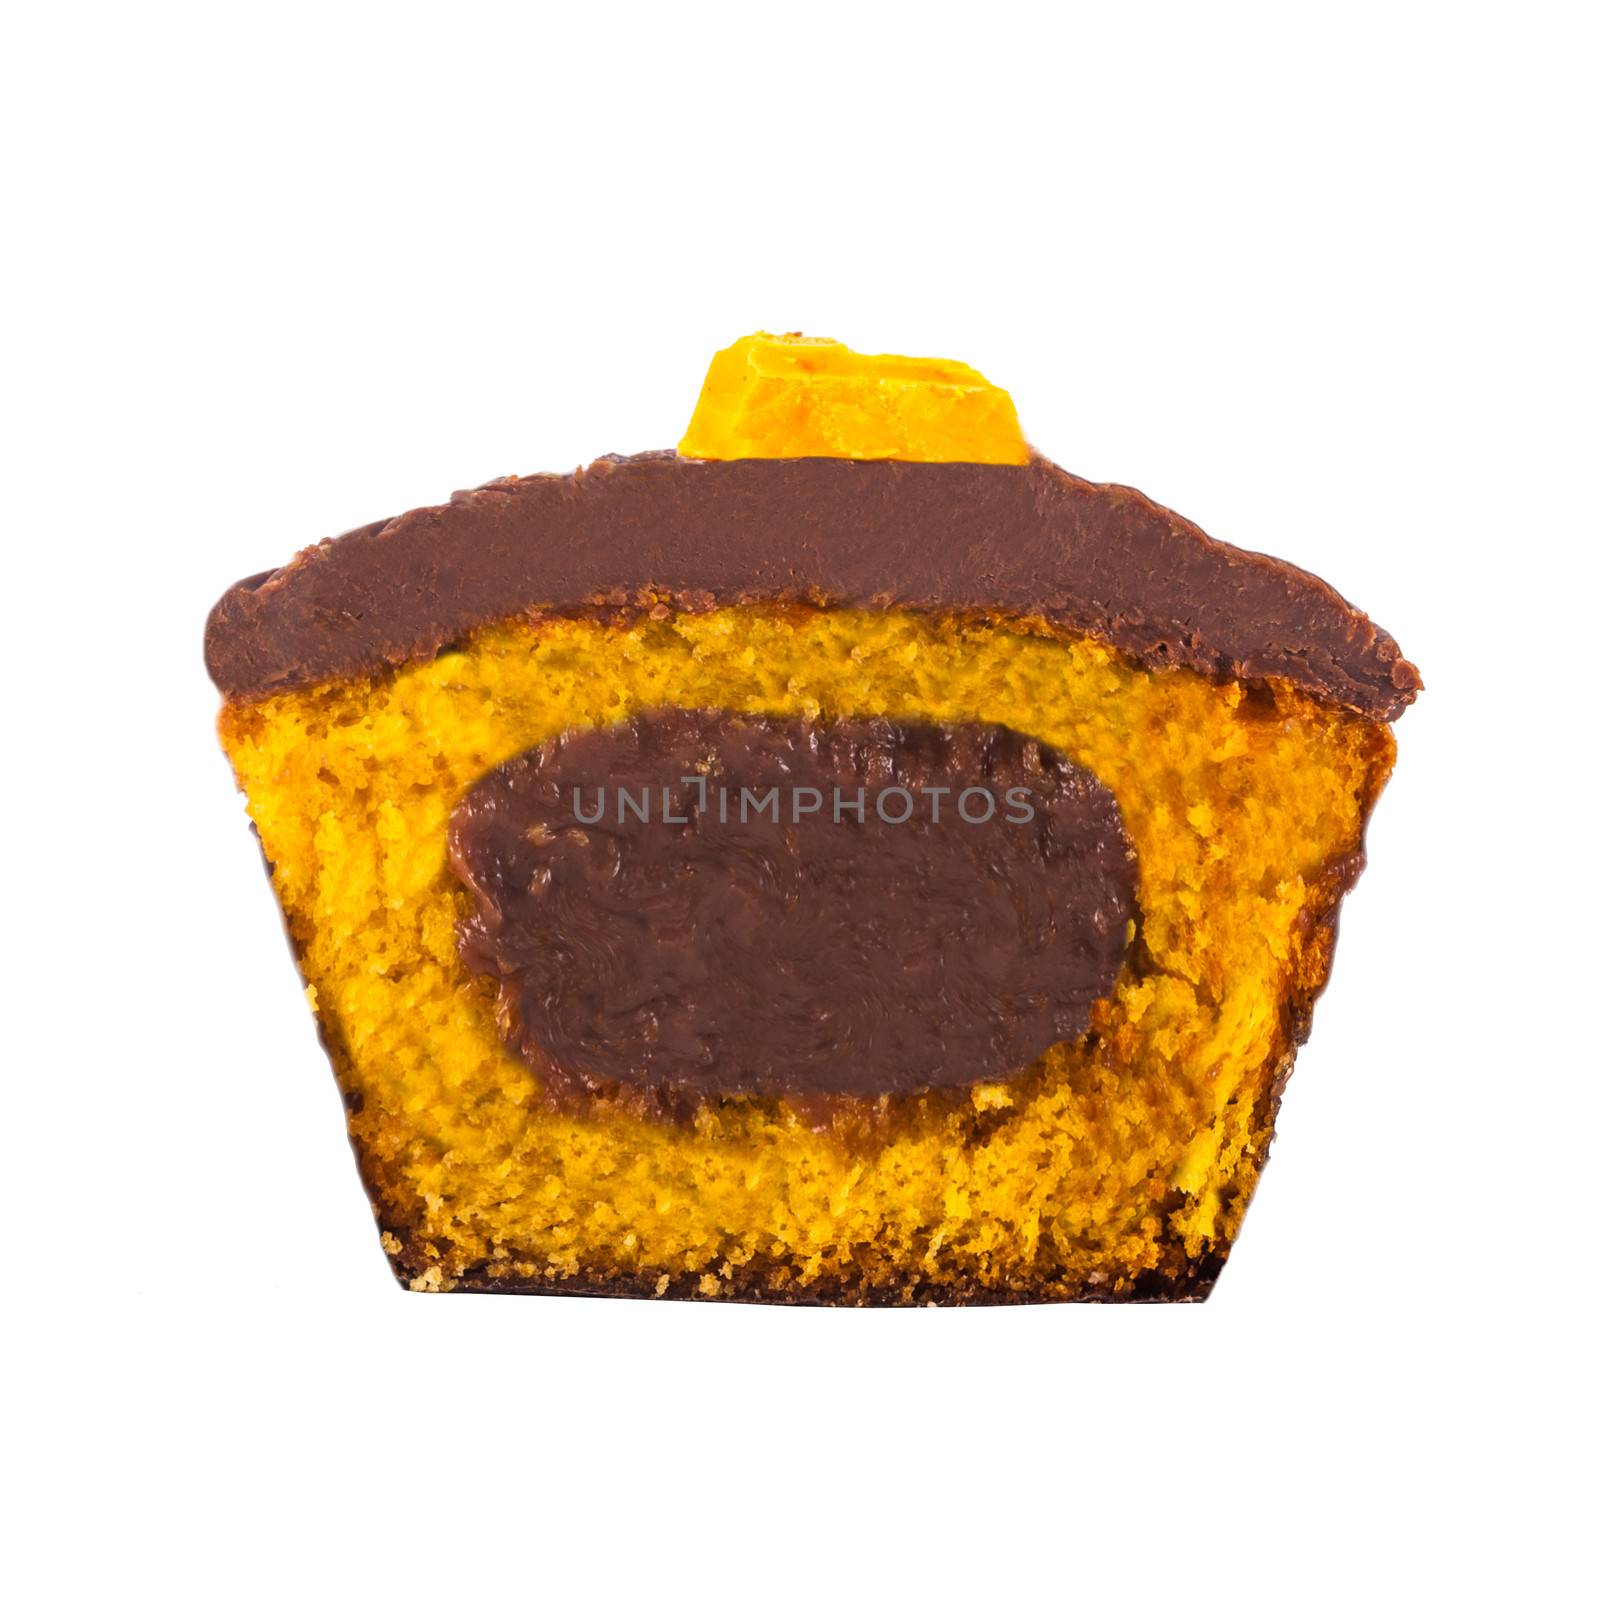 A delicious chocolate and carrot cupcake cut in half isolated on a white background.